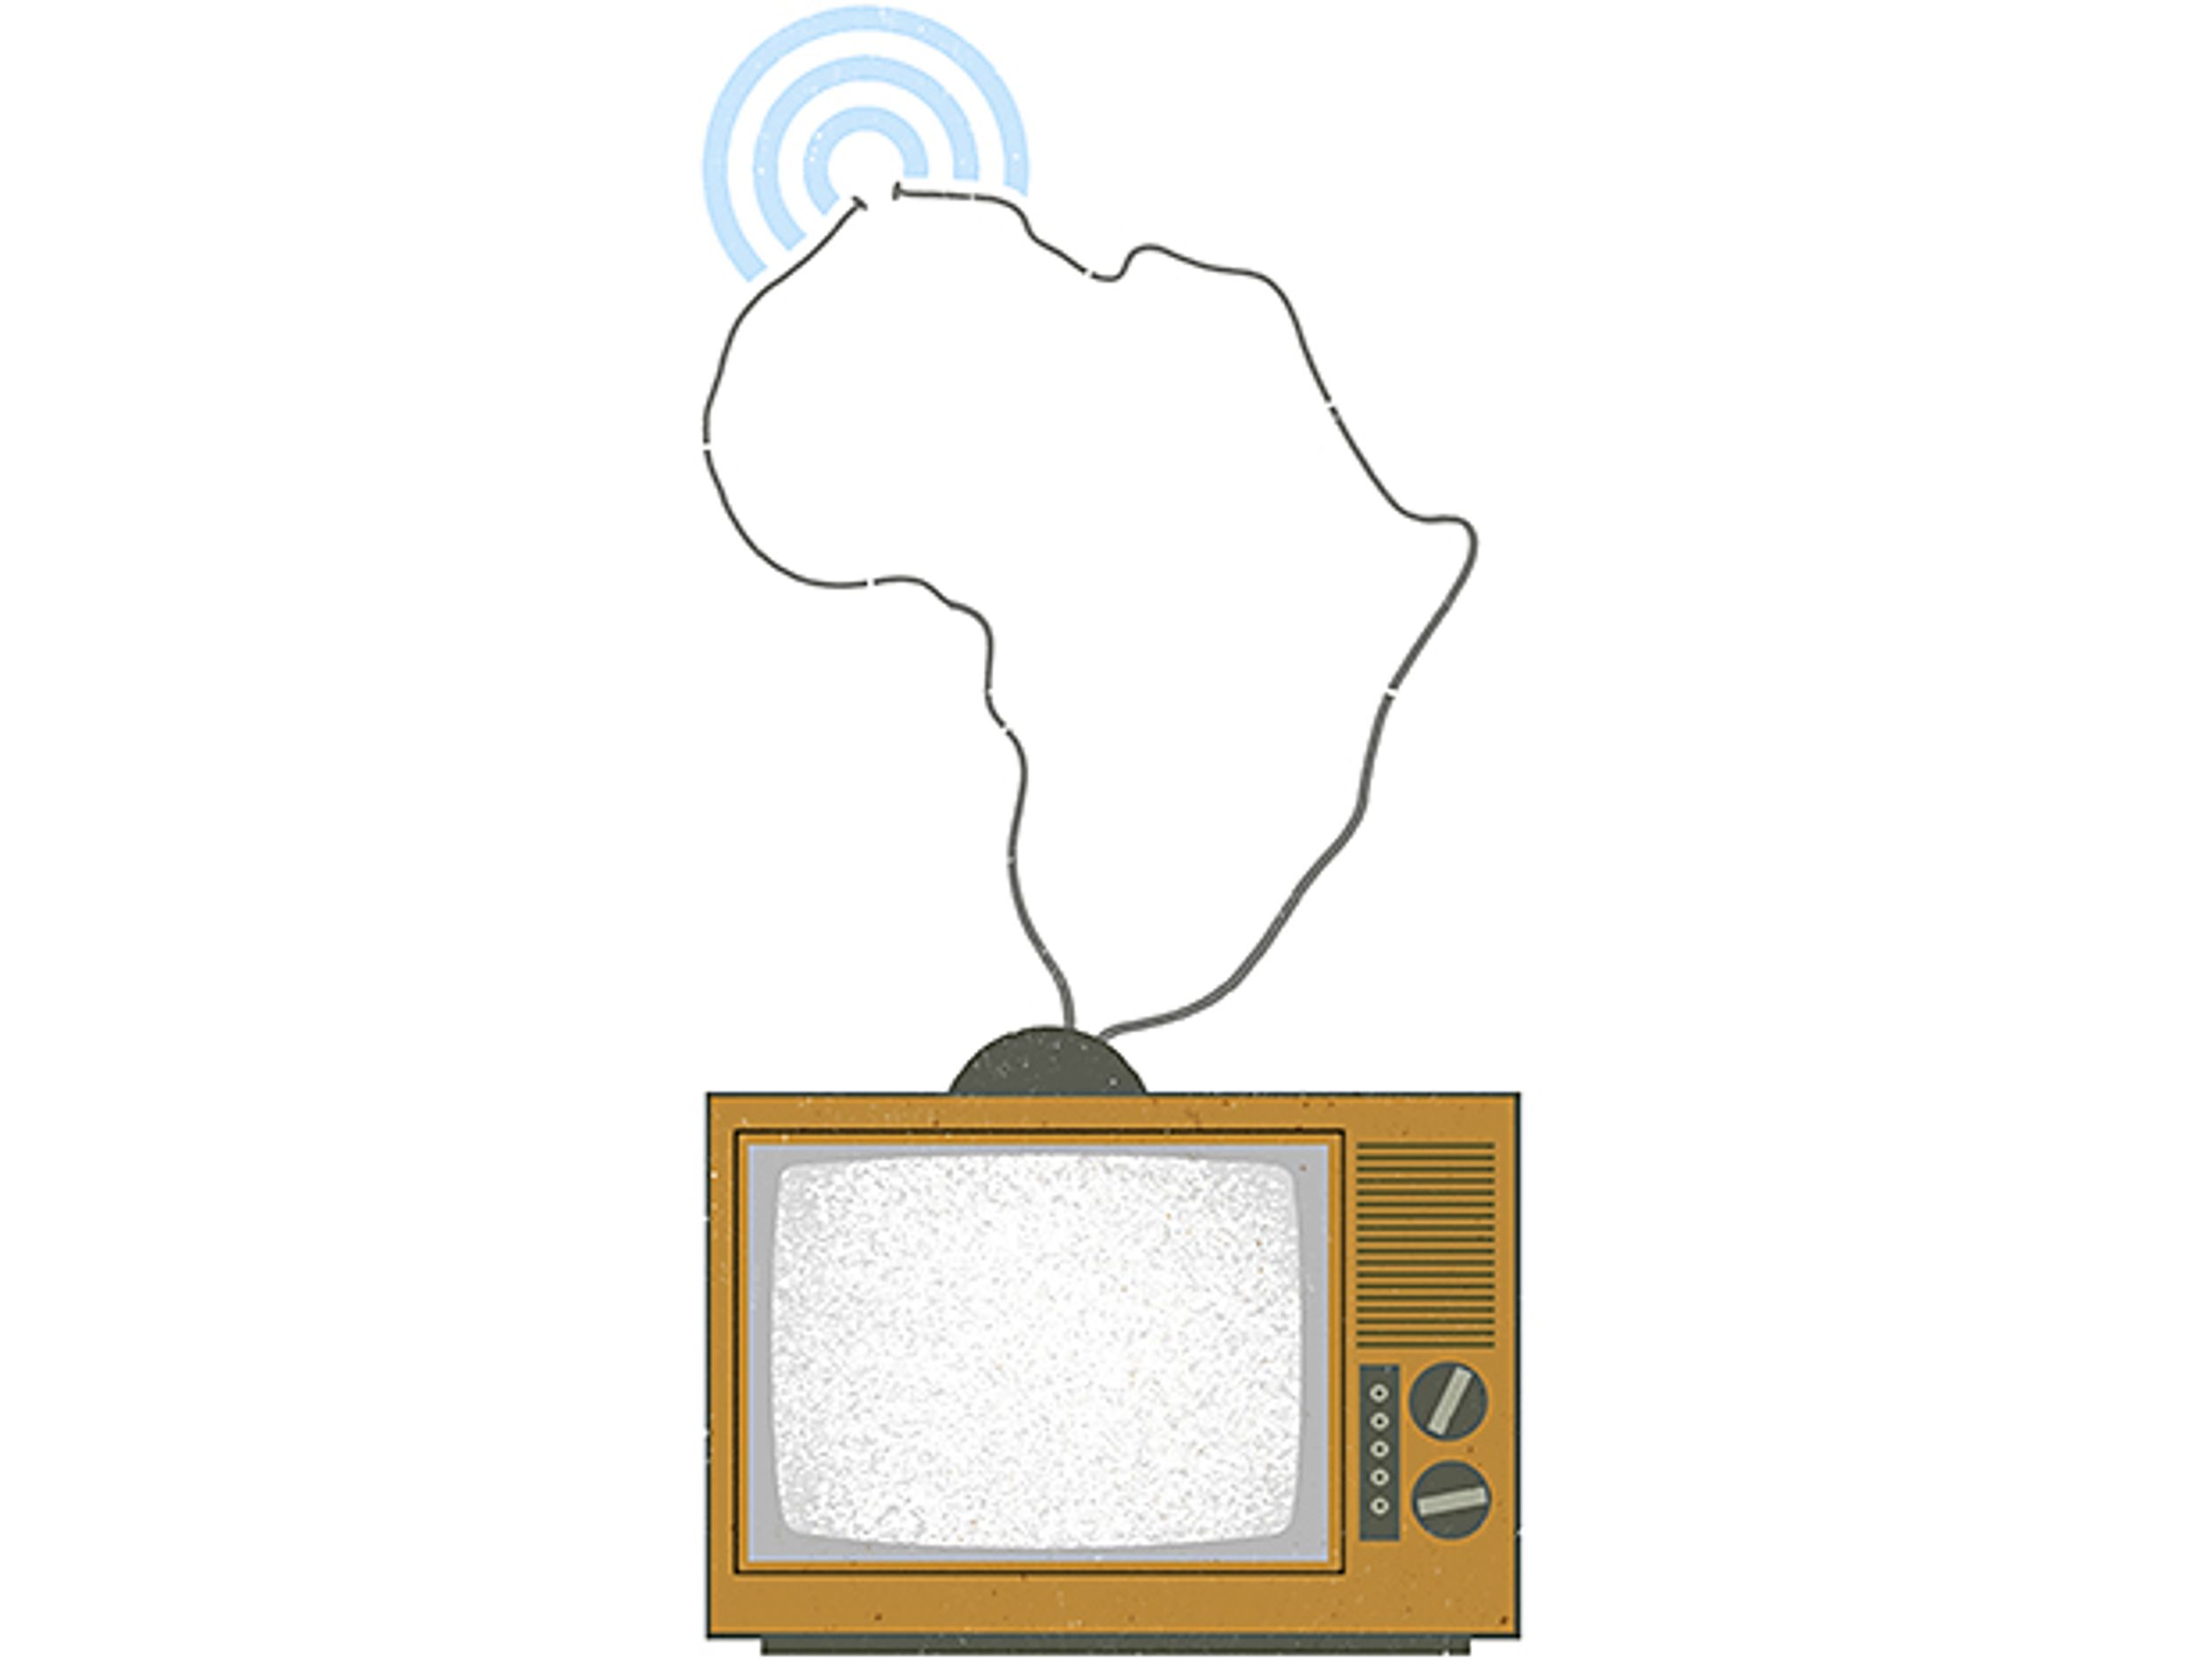 Opening illustration for Malawi and South Africa Pioneer Unused TV Frequencies for Rural Broadband.